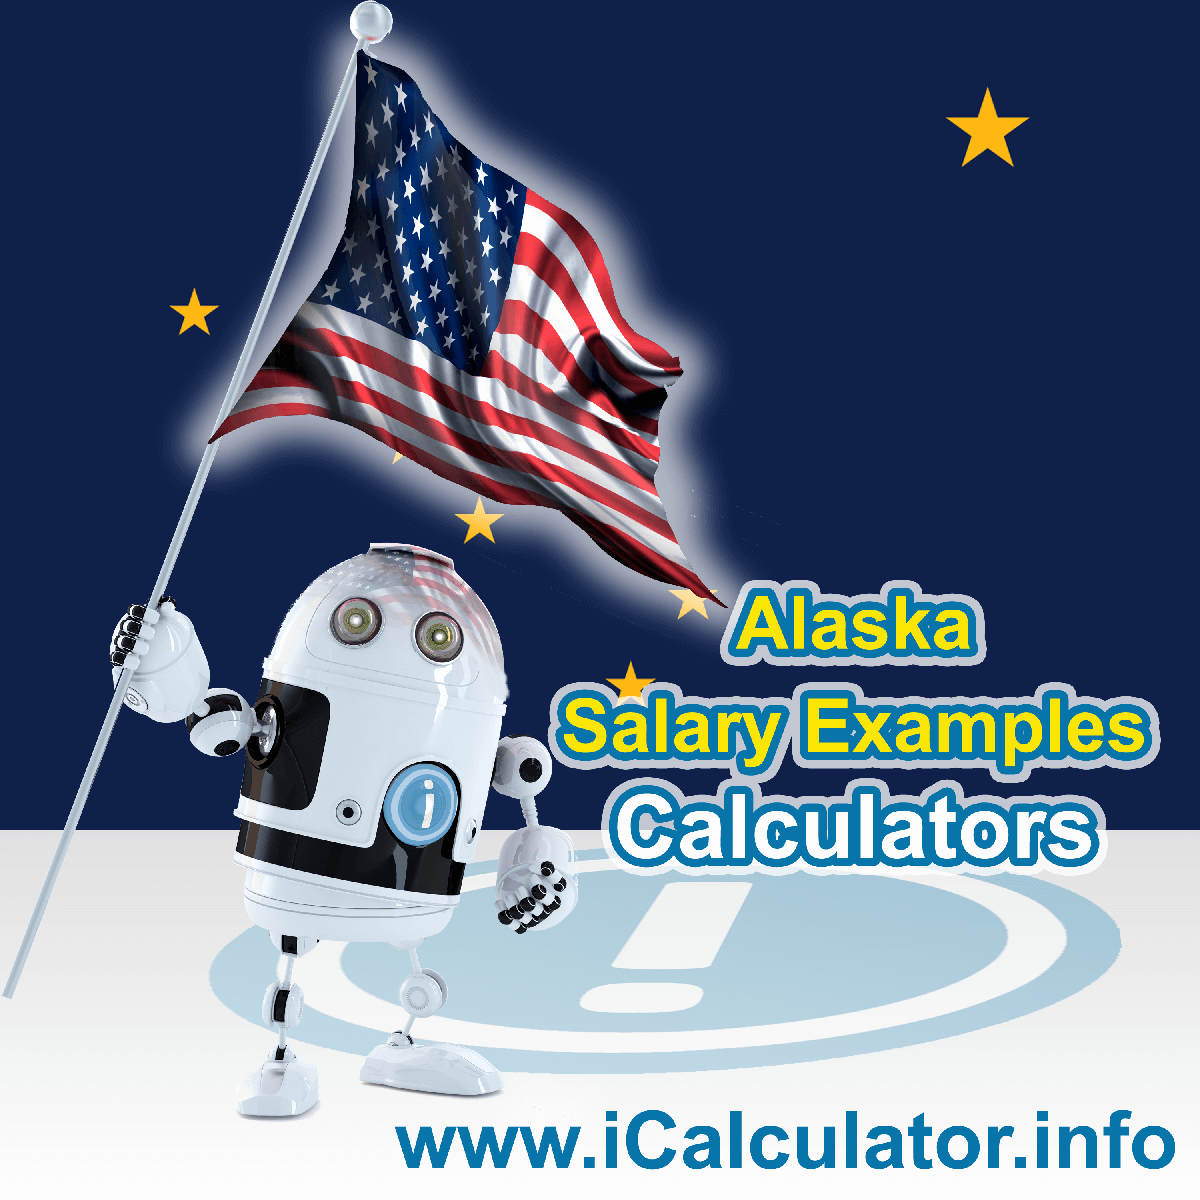 Alaska Salary Example for $ 40,000.00 in 2023 | iCalculator™ | $ 40,000.00 salary example for employee and employer paying Alaska State tincome taxes. Detailed salary after tax calculation including Alaska State Tax, Federal State Tax, Medicare Deductions, Social Security, Capital Gains and other income tax and salary deductions complete with supporting Alaska state tax tables 